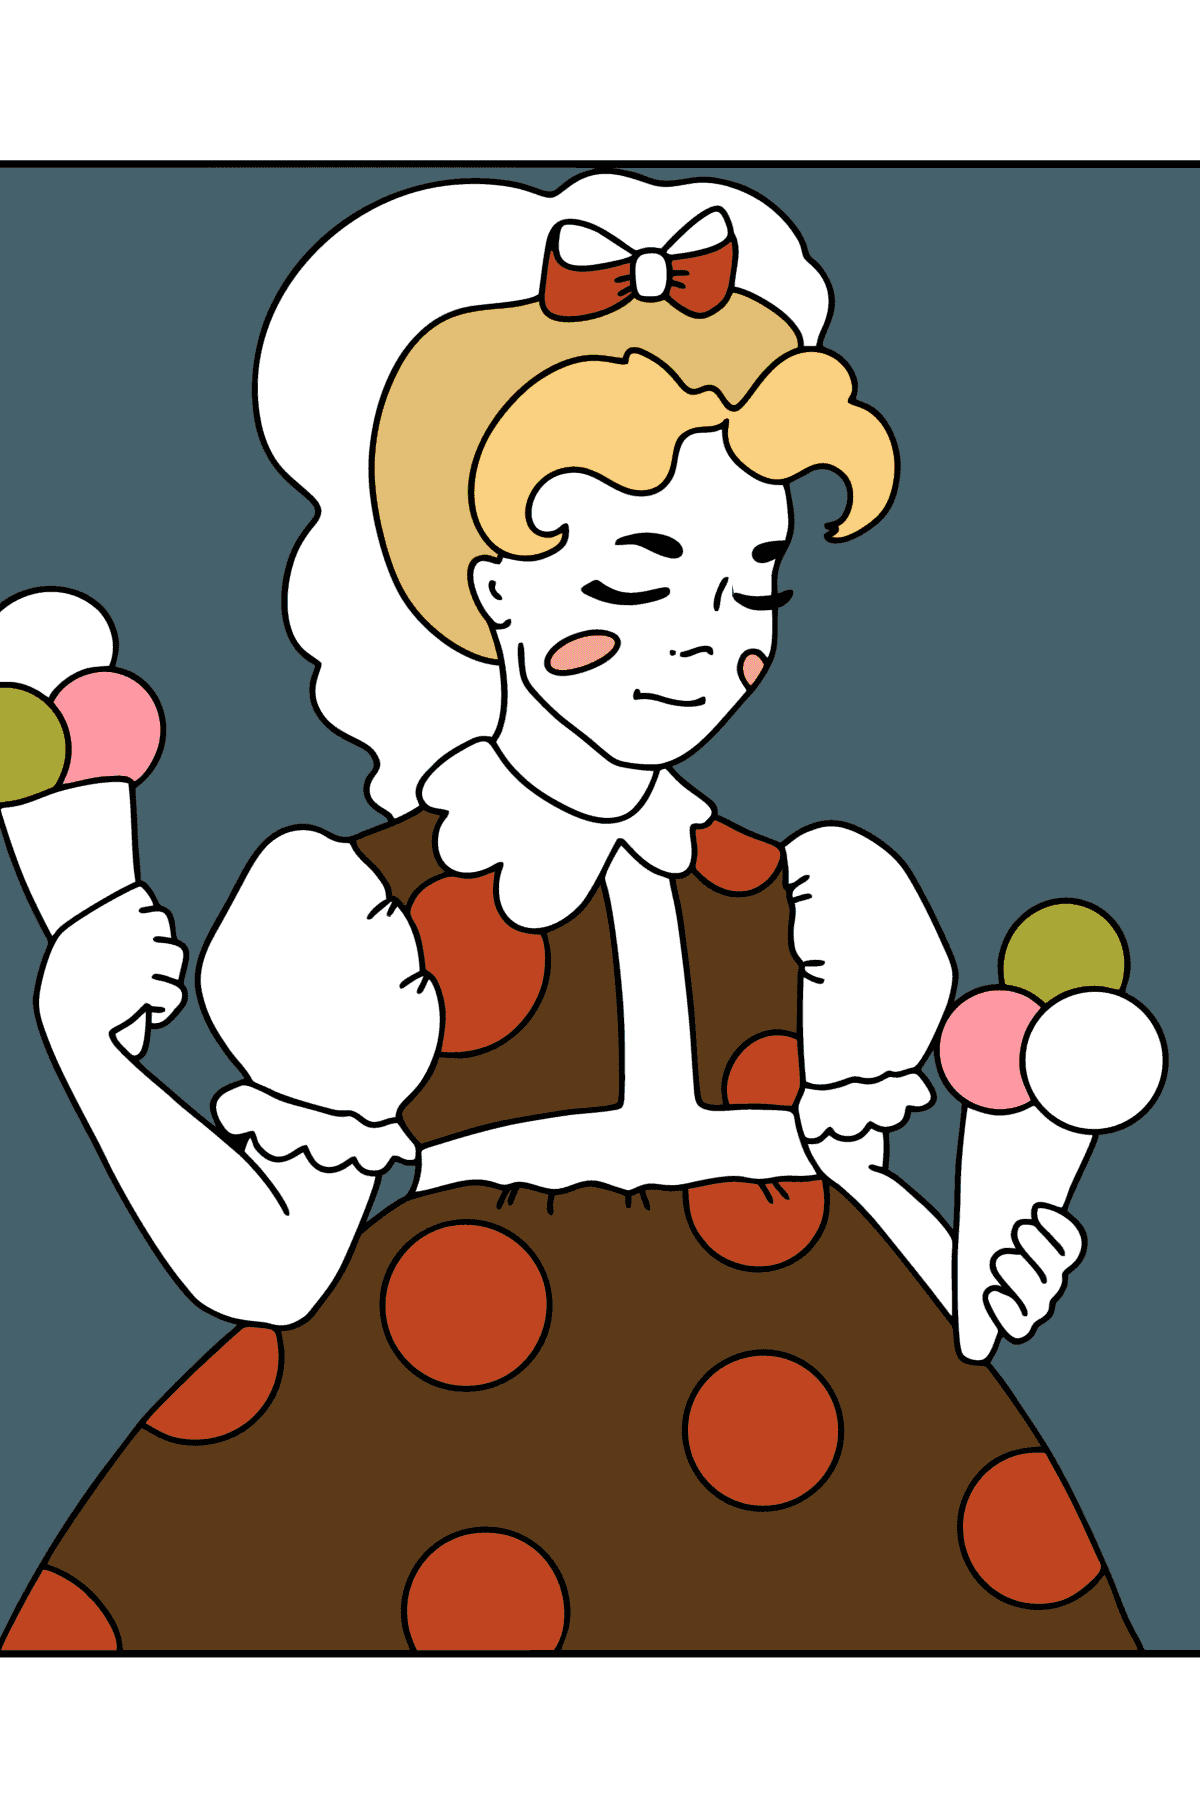 Girl with ice cream сoloring page - Coloring Pages for Kids